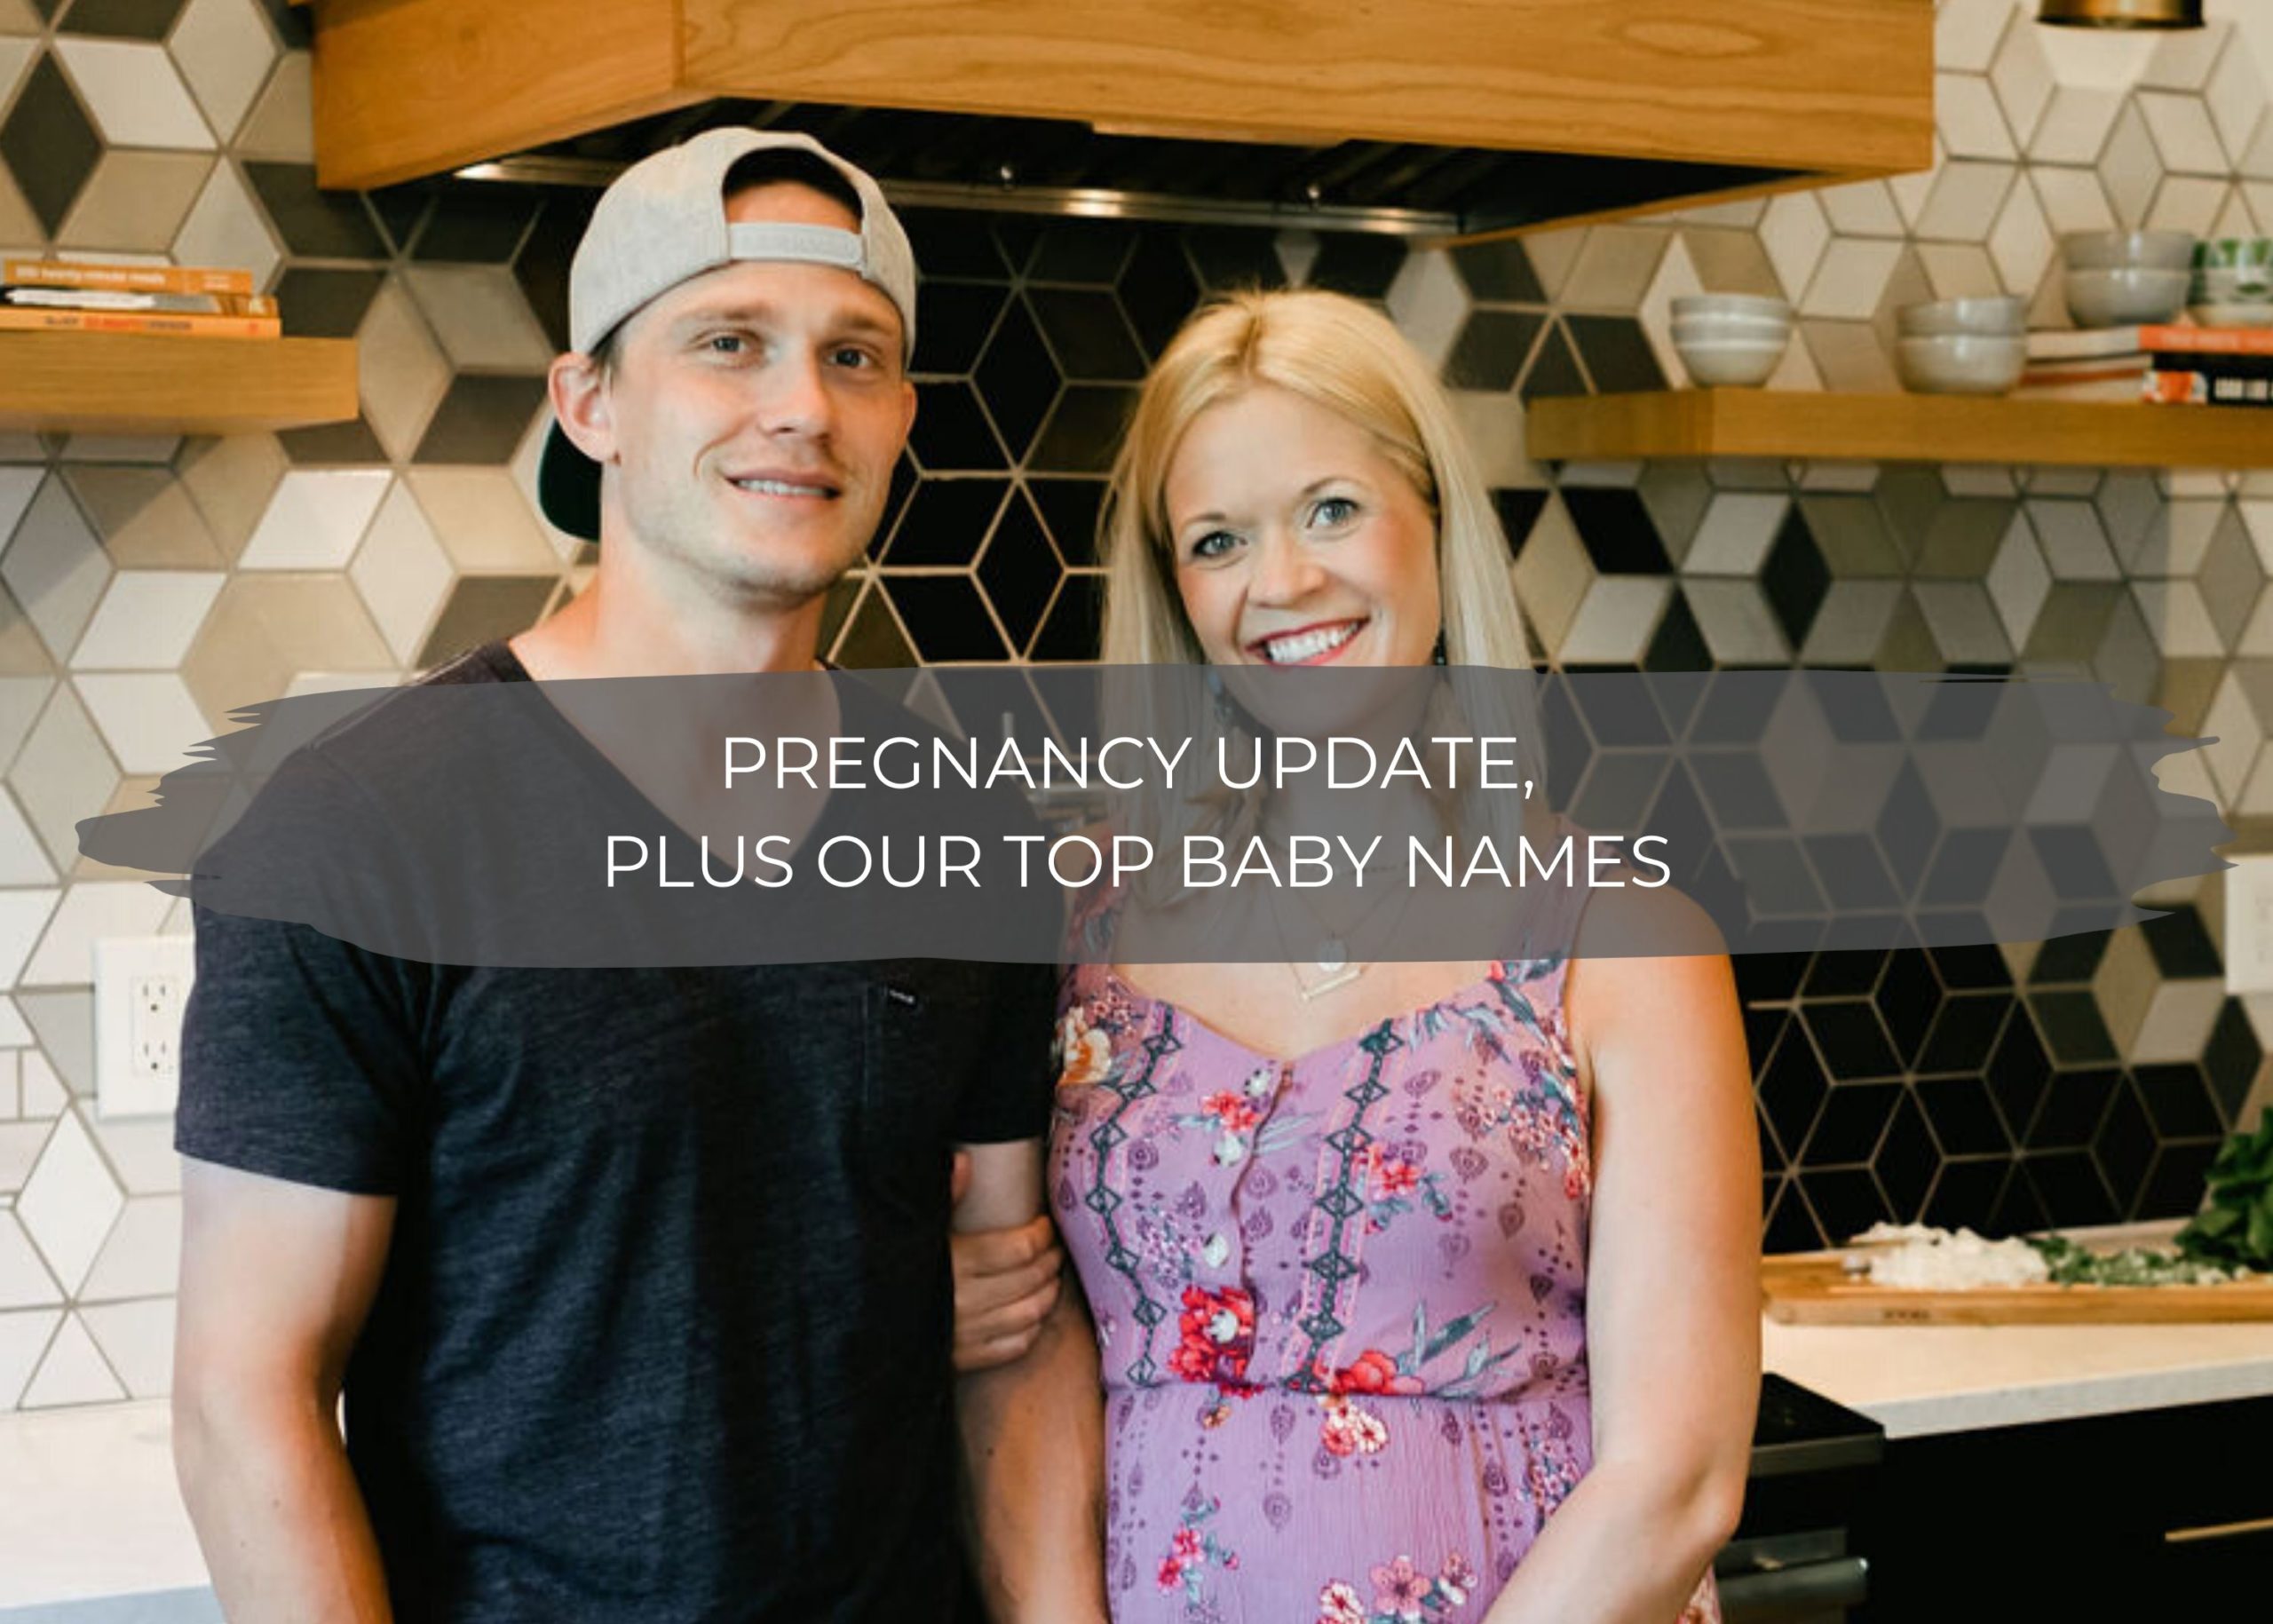 Pregnancy Update, Plus our Top Baby Names